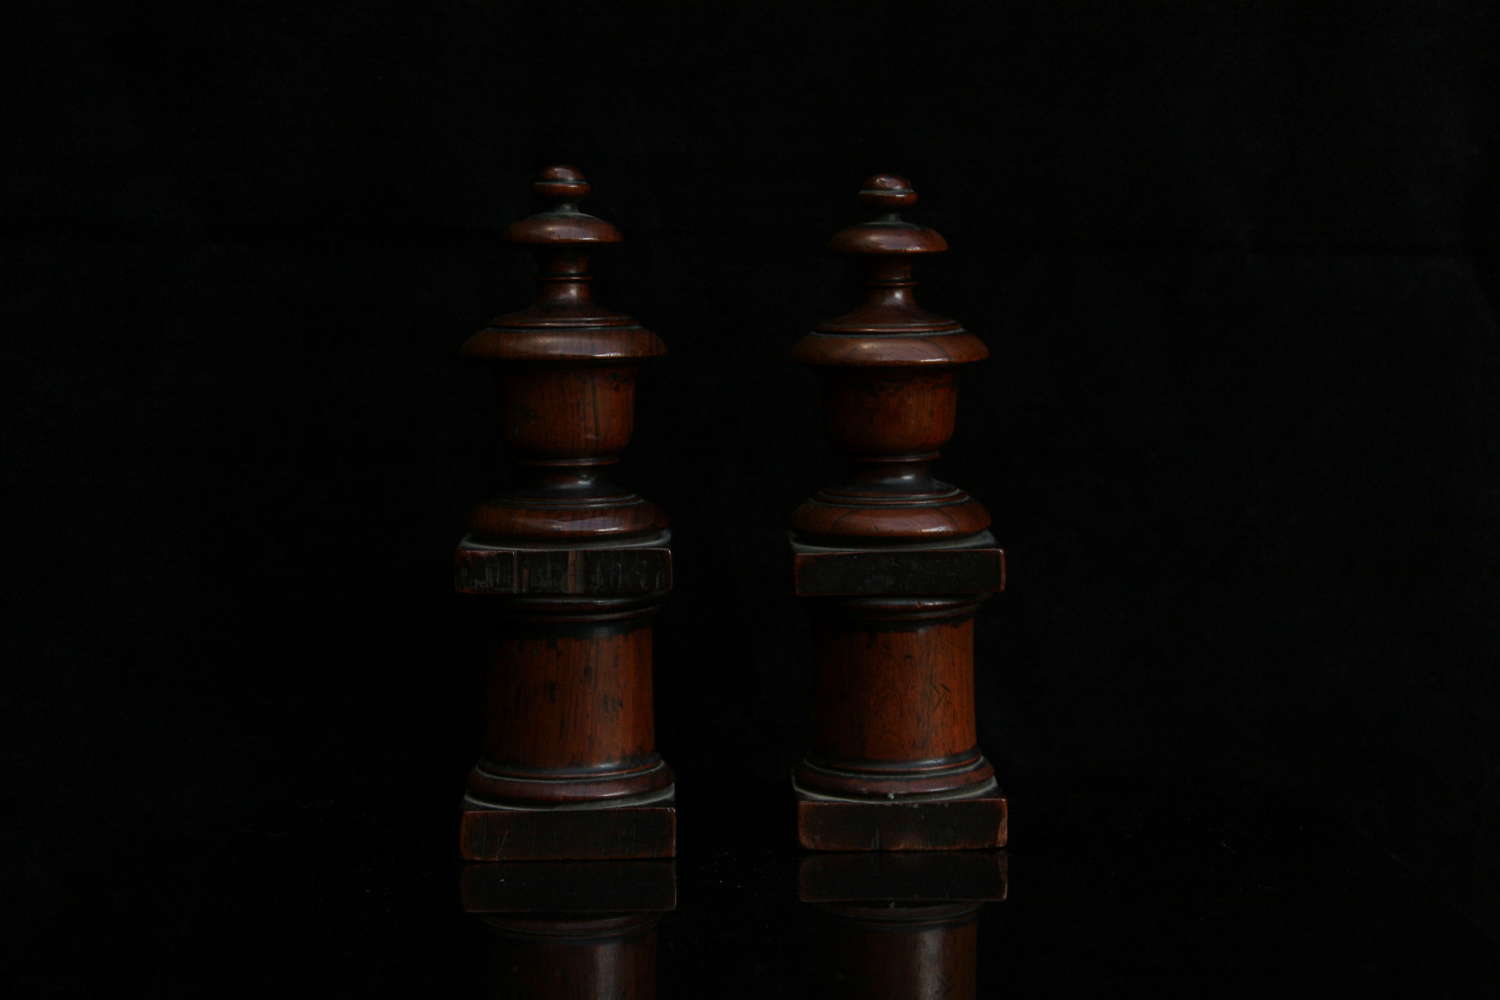 A pair of 19th century decorative wooden chimney ornaments